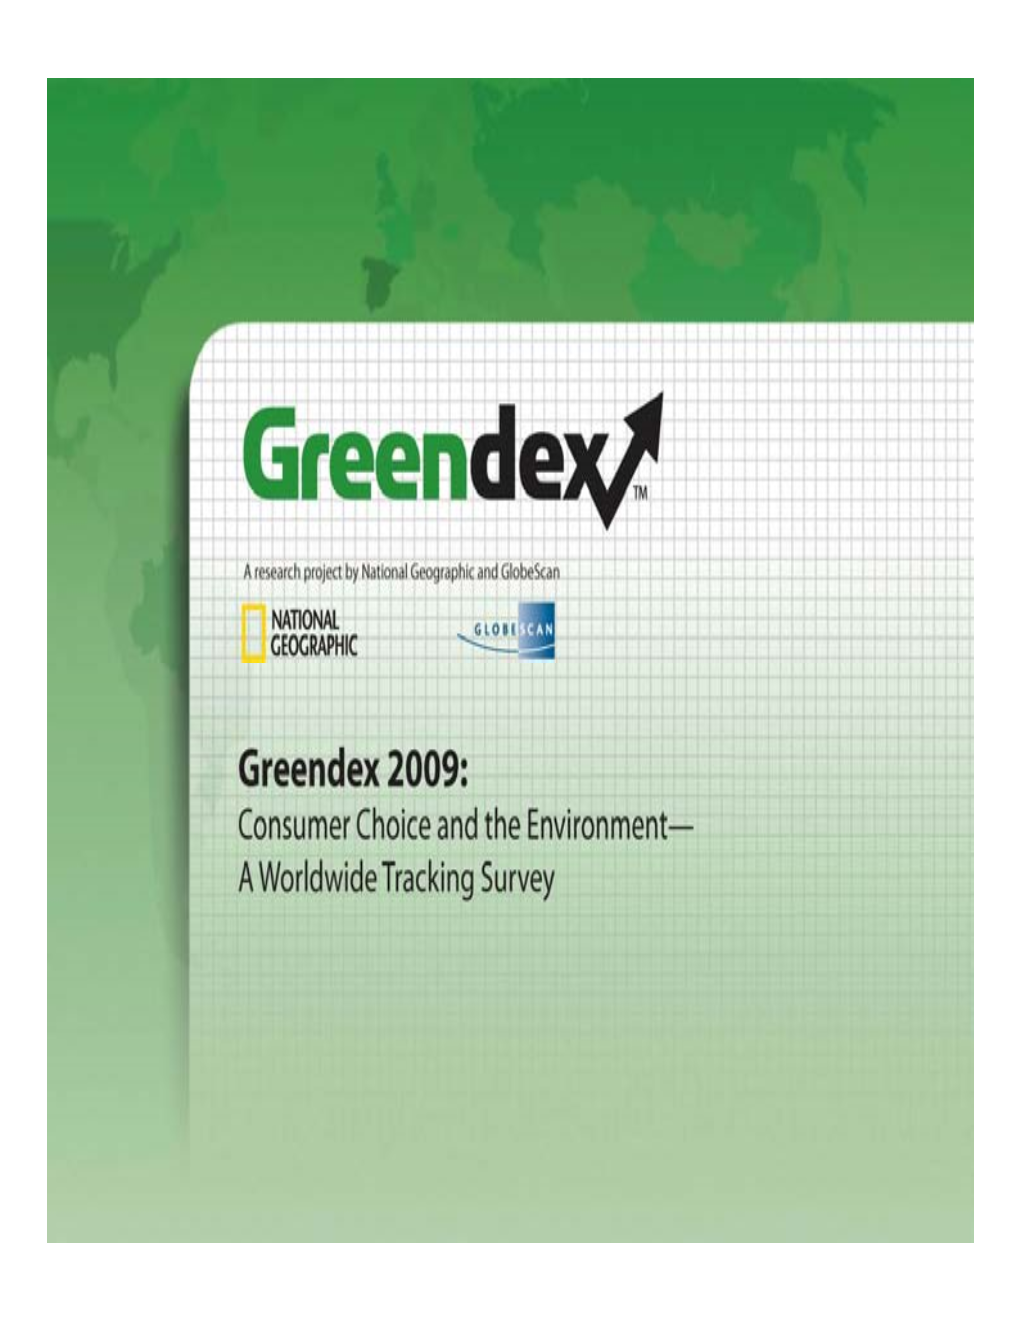 Greendex 32 Greendex Results 45 Attitudes and Beliefs: Findings by Country 53 Housing 91 Transportation 139 Food 191 Goods 230 Citizen Behavior 279 Knowledge 288